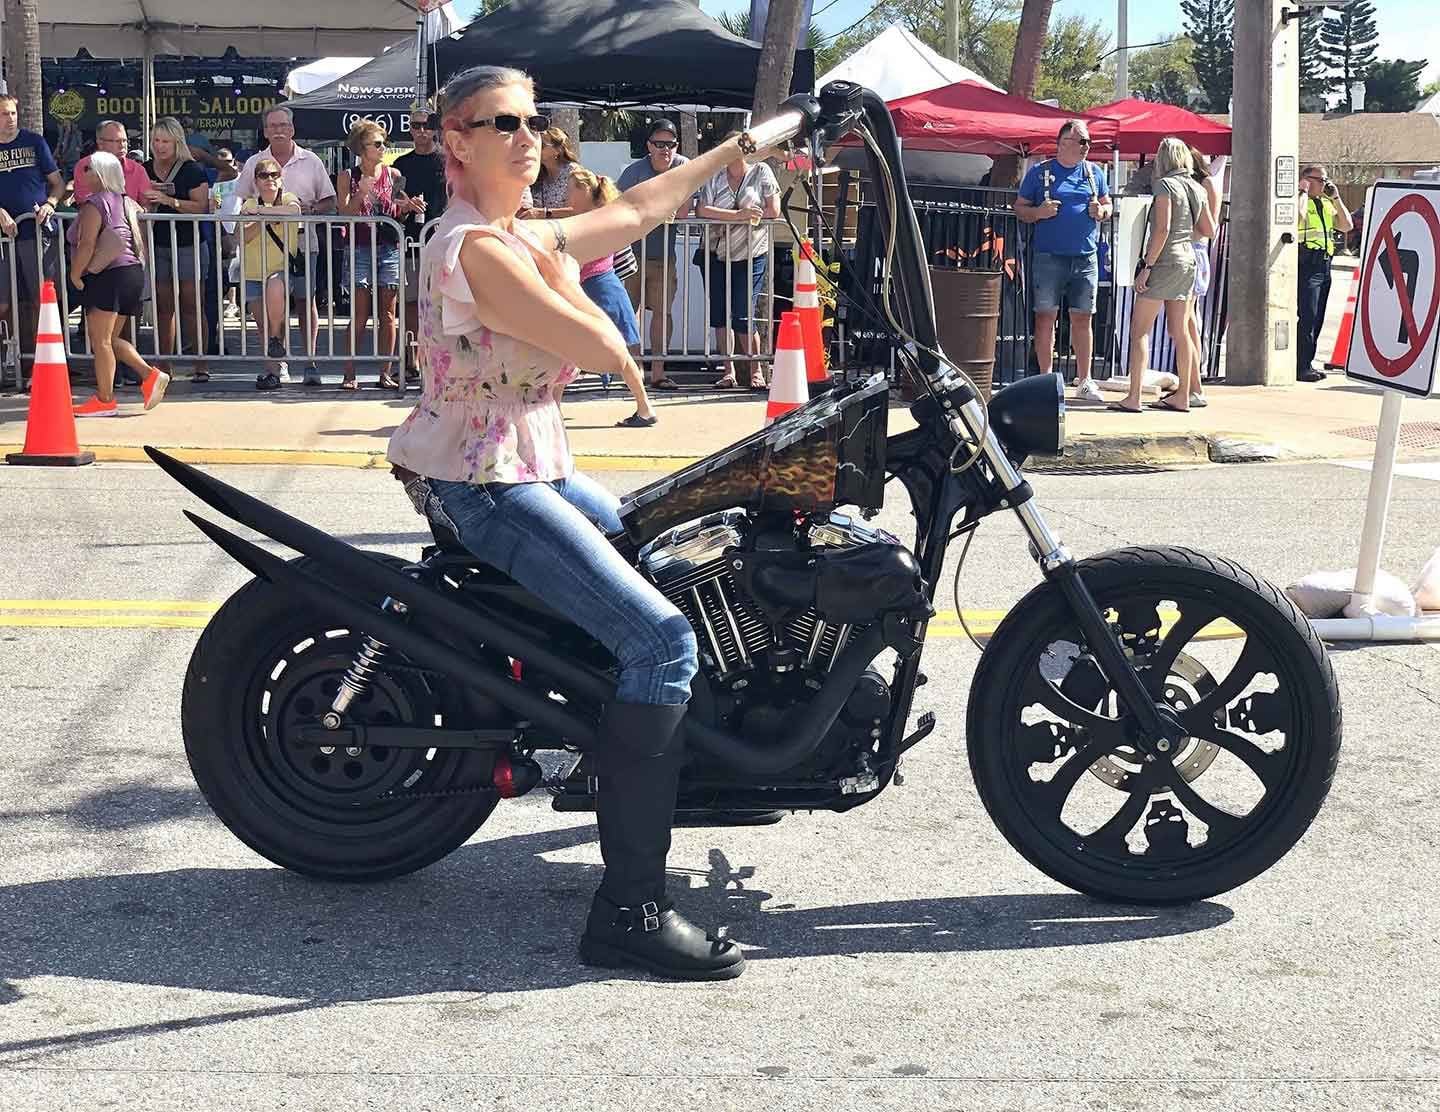 Women represented at Bike Week on all types of machines.